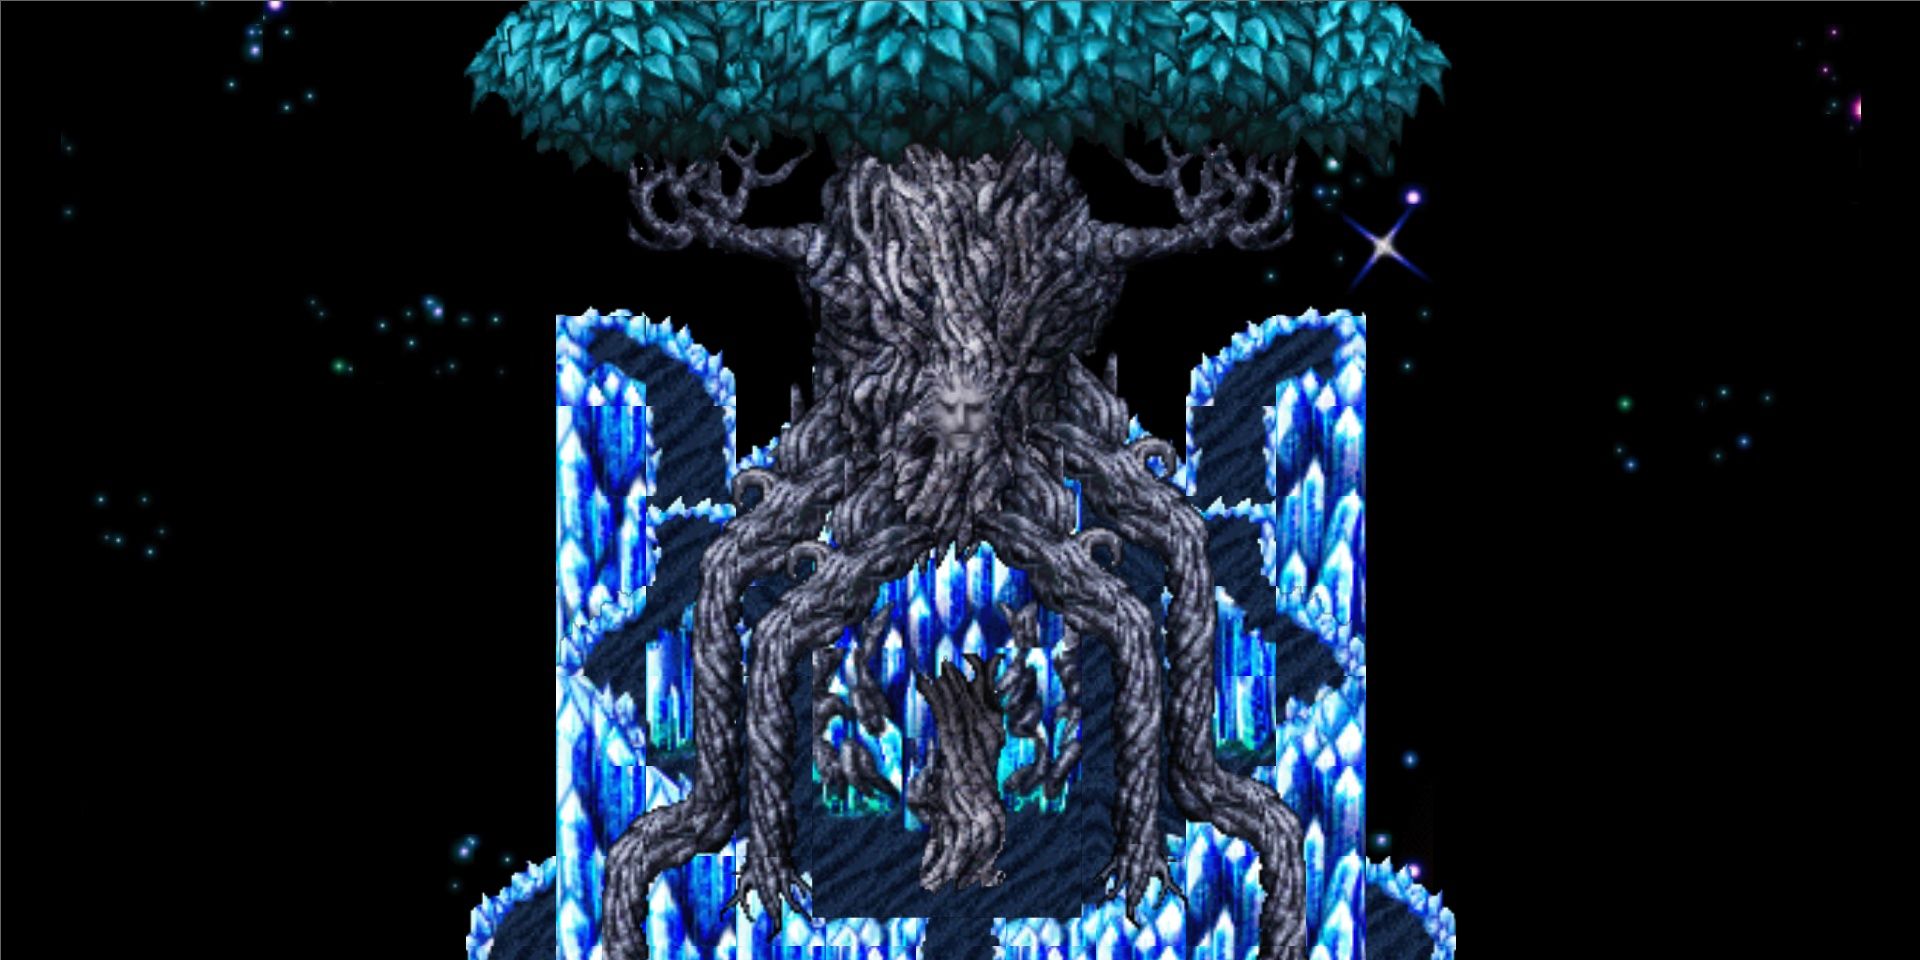 Exdeath's Tree Form in Final Fantasy V